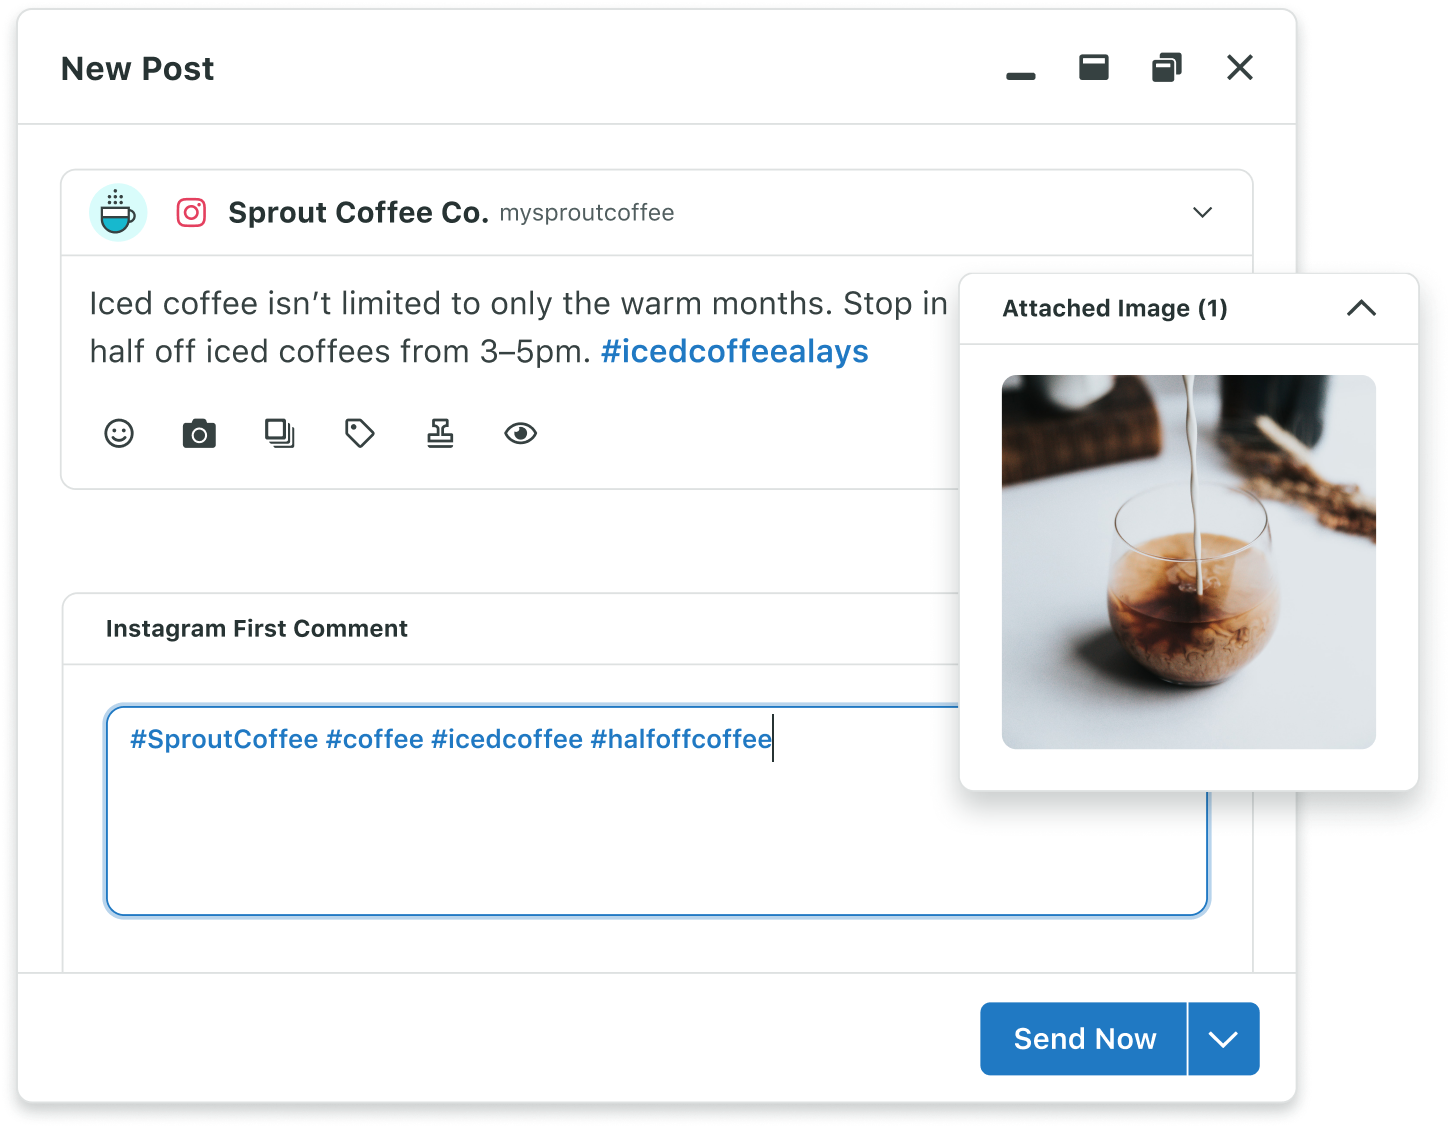 Schedule your first Instagram Comment along with your new post right from the Compose window, including hashtags to help expand the reach of your content.